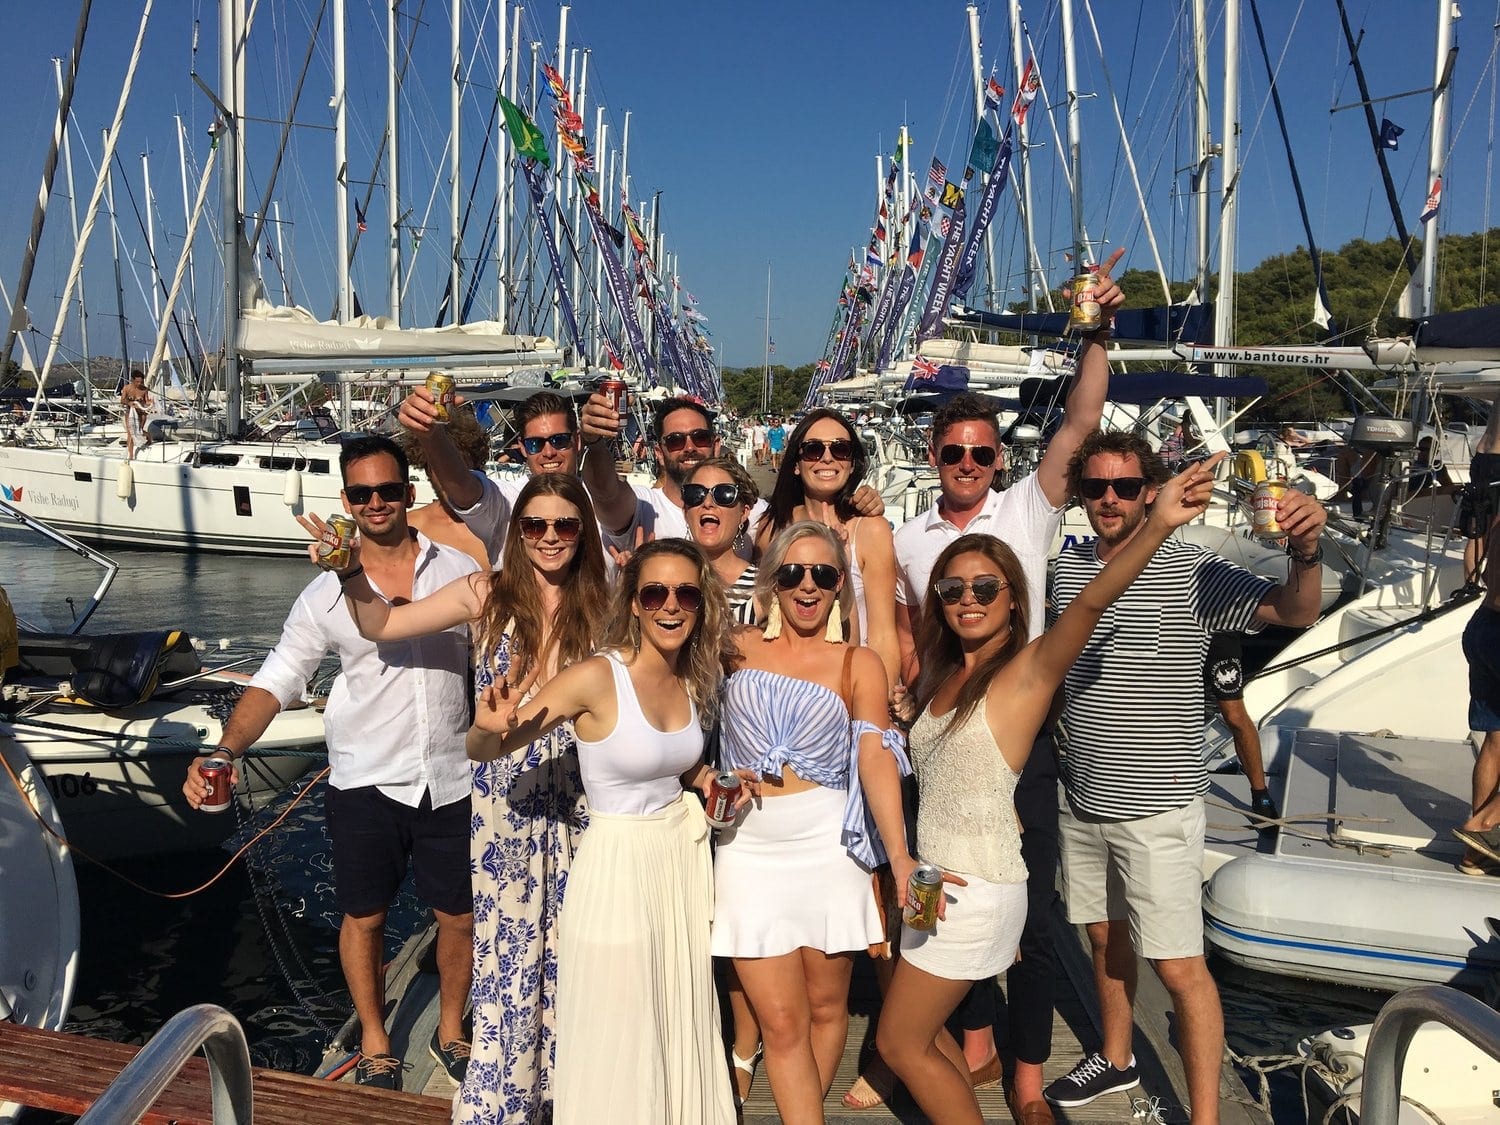 Visited the Croatia and sailed around for a week on Yacht Week with 11 absolute legends